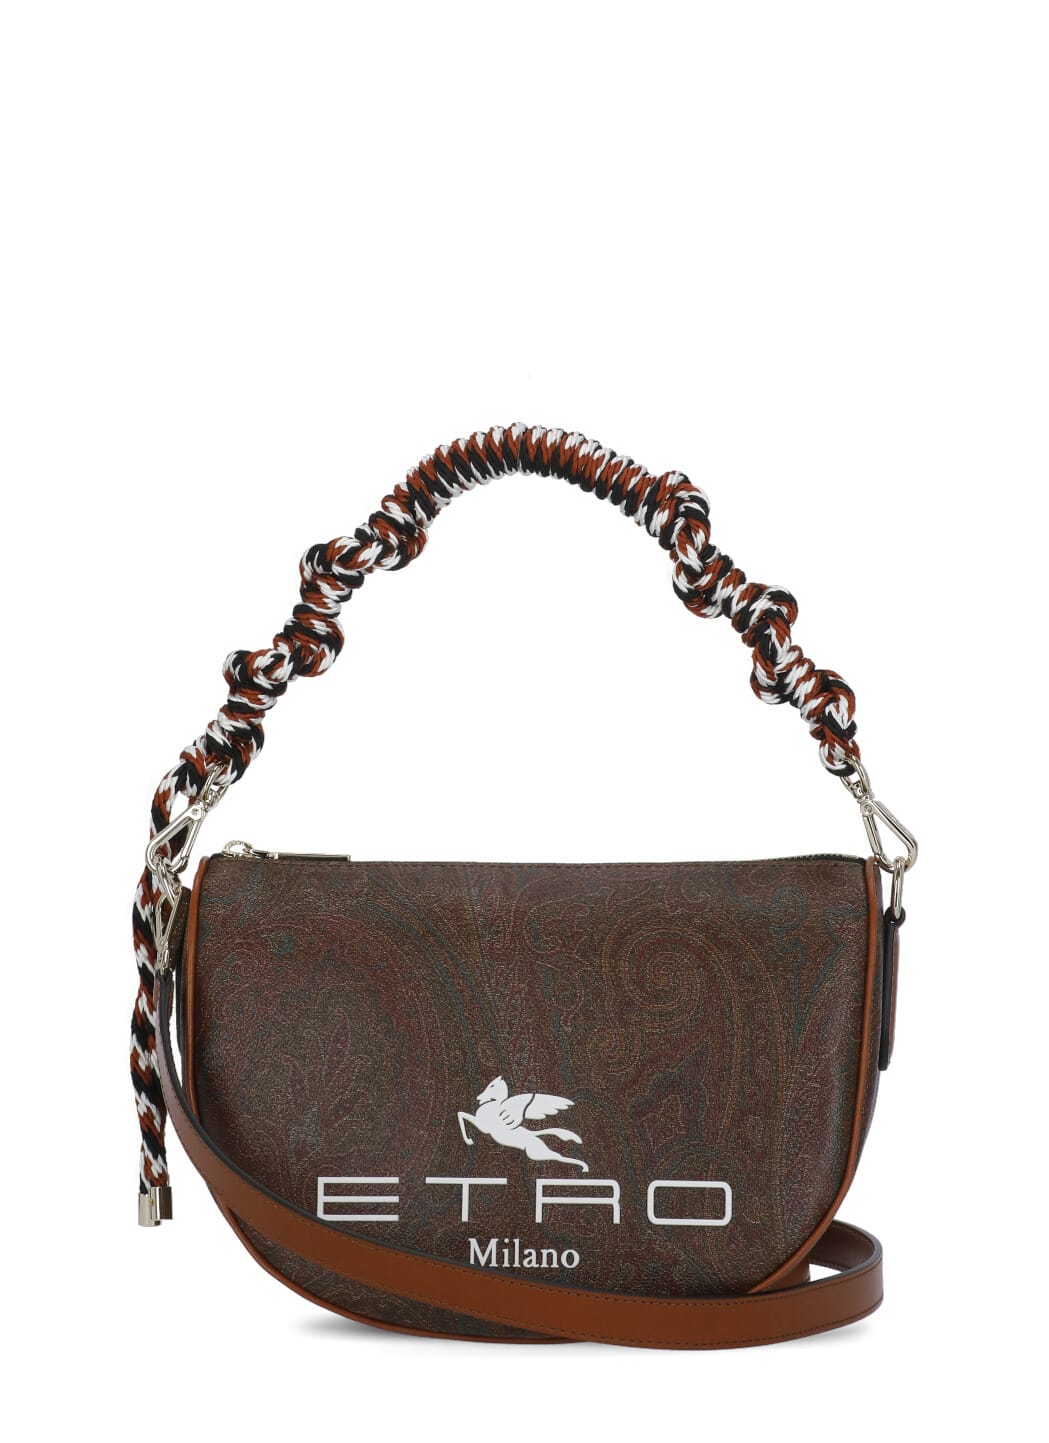 Etro Shoulder Bag With Paisley Pattern